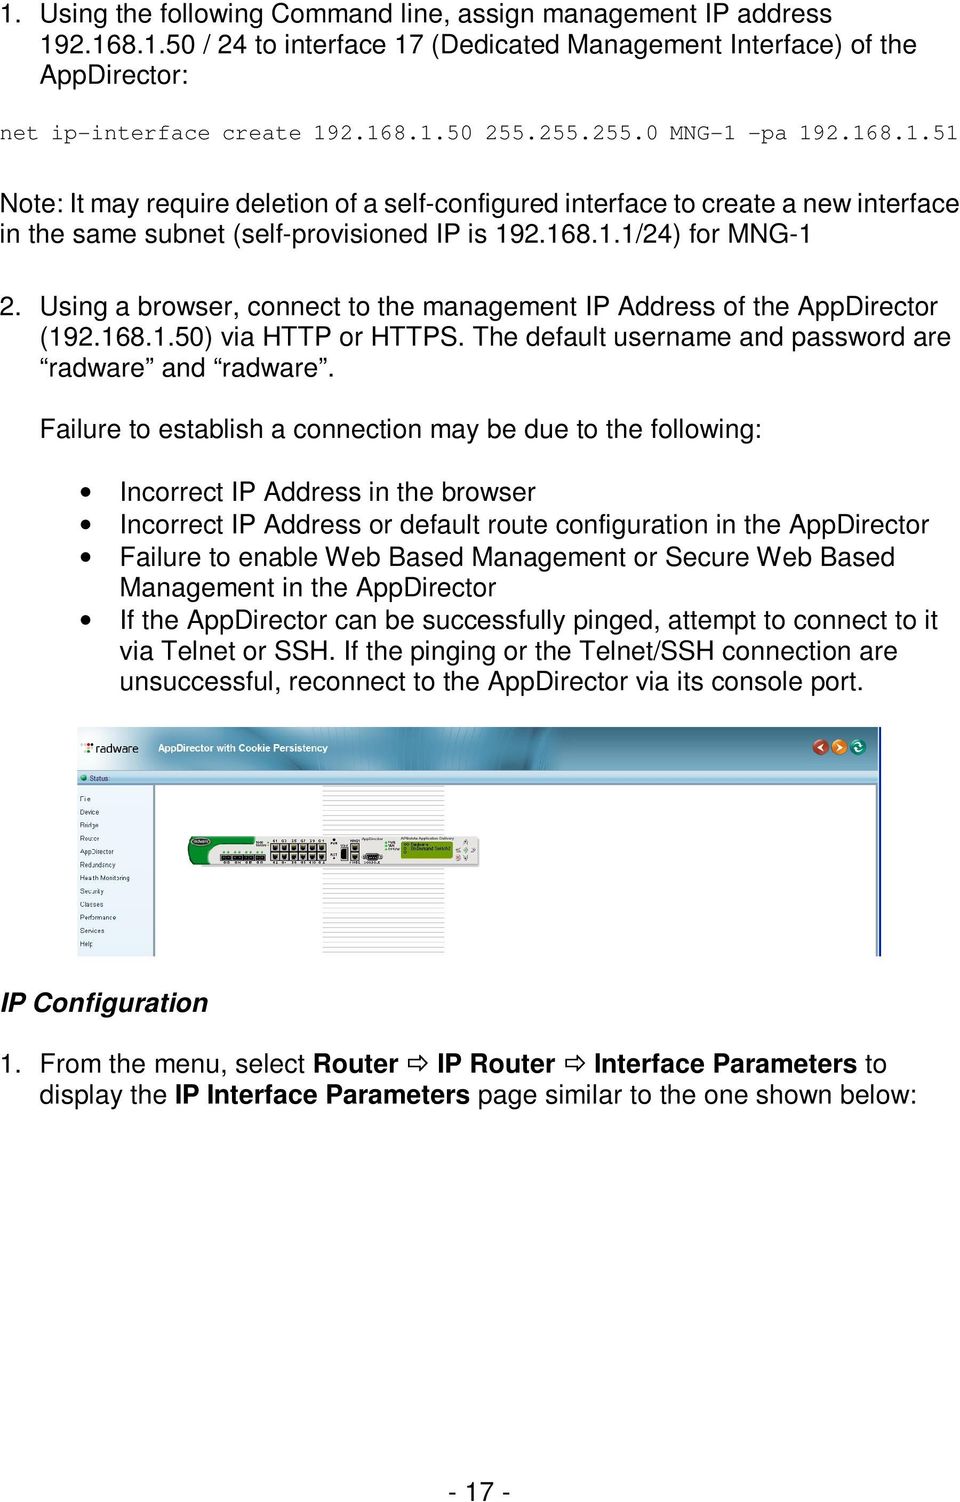 Using a browser, connect to the management IP Address of the AppDirector (192.168.1.50) via HTTP or HTTPS. The default username and password are radware and radware.